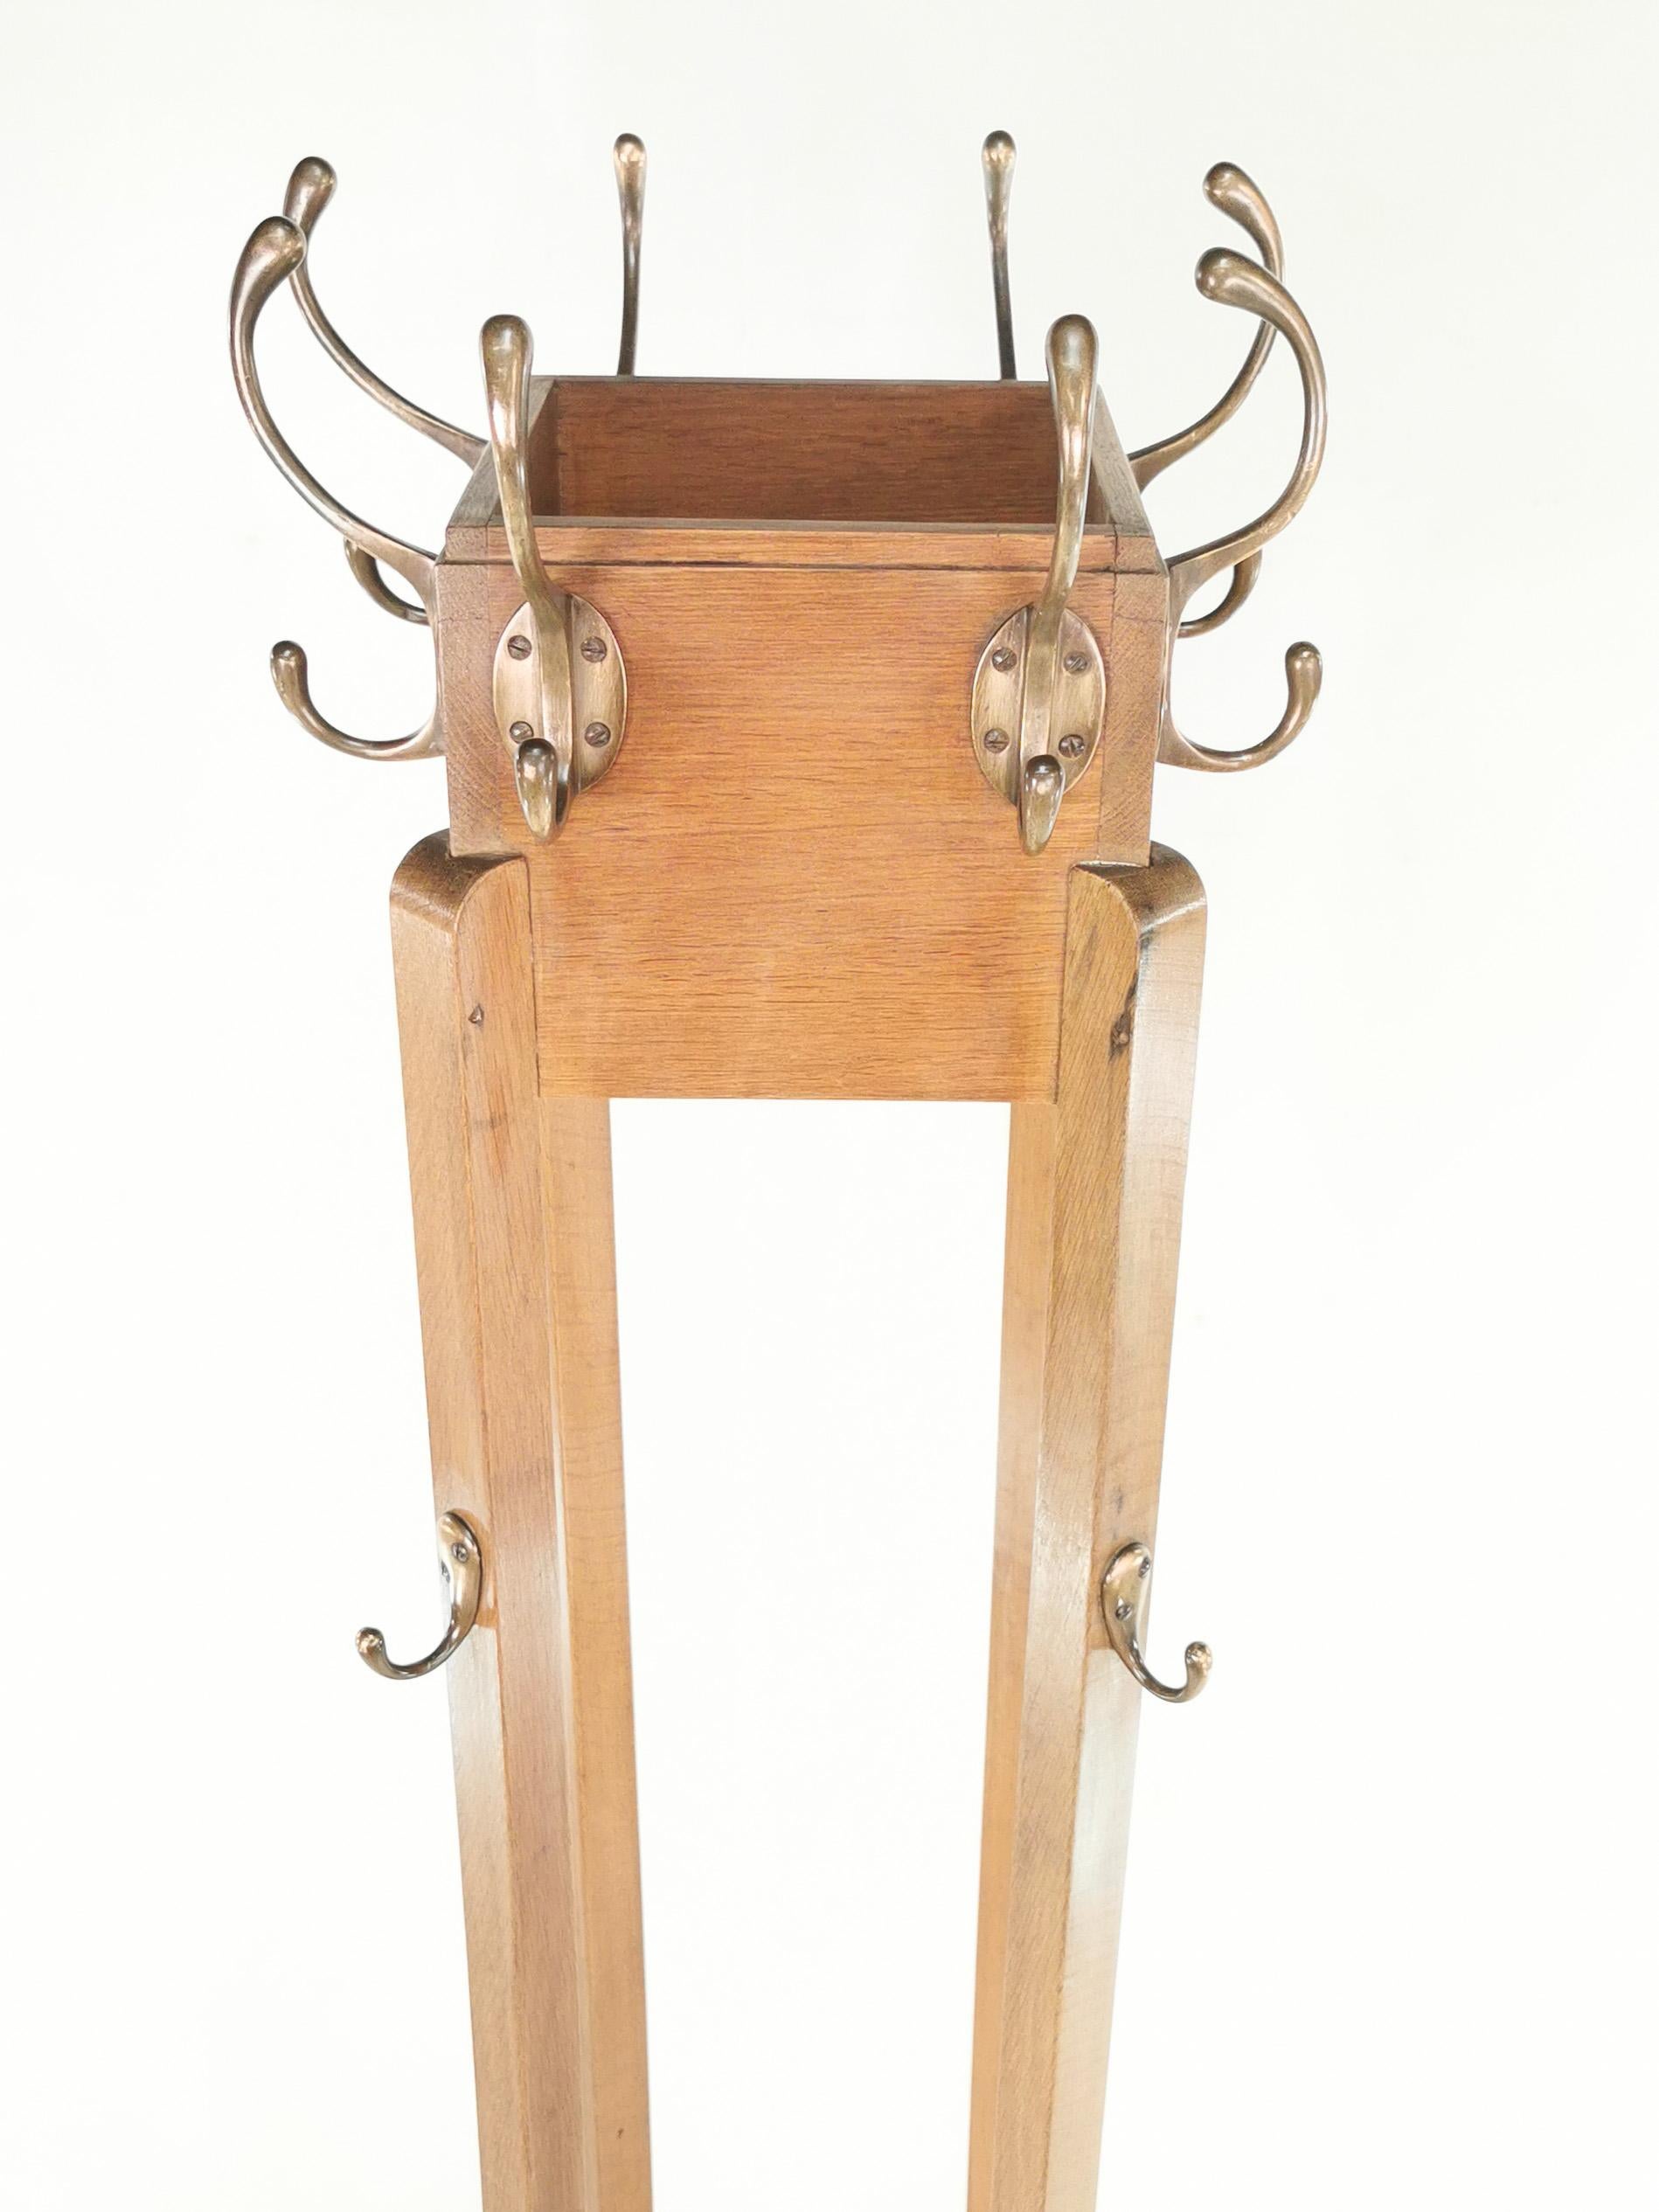 Art Deco coat stand 

A British made art deco solid oak coat stand with superb line from that era. Circa 1940.

Eight upper hooks, and four lower hooks for hats and coats. 

Dimensions (cm): 

197 H x 58 W x 58 D

Condition: 

The coat